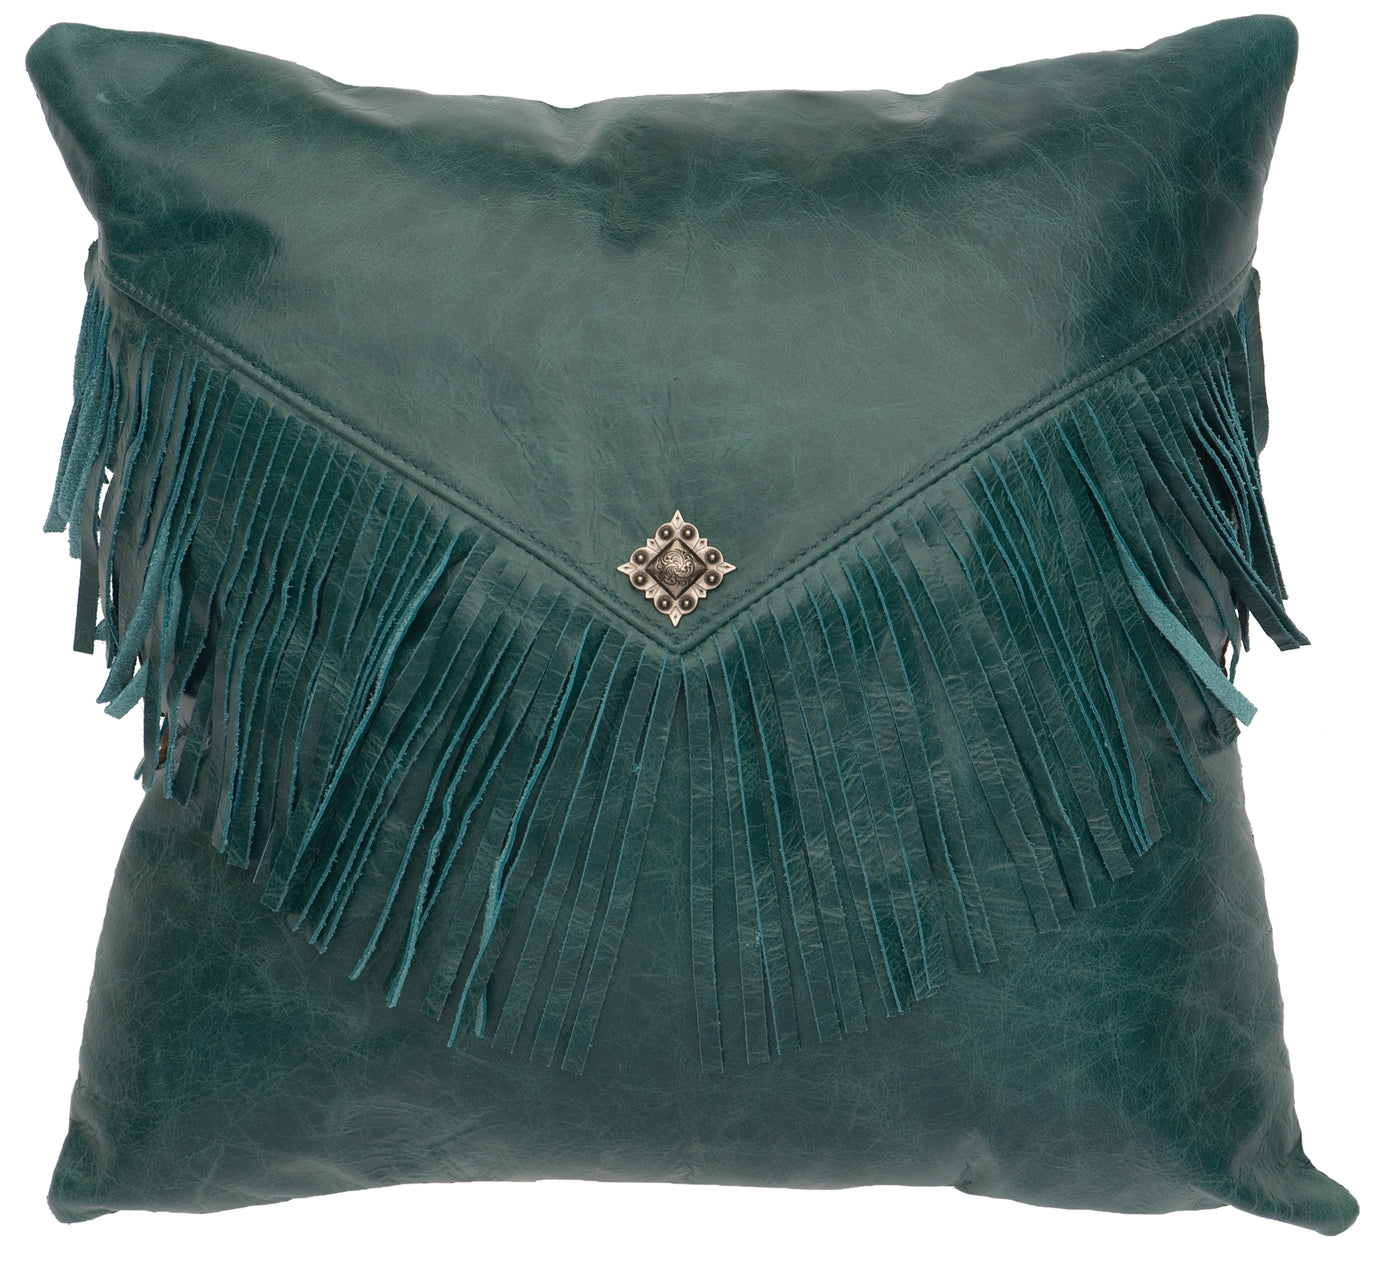 Canvello Peacock Leather Pillow - Fabric Back - 16" x 16"